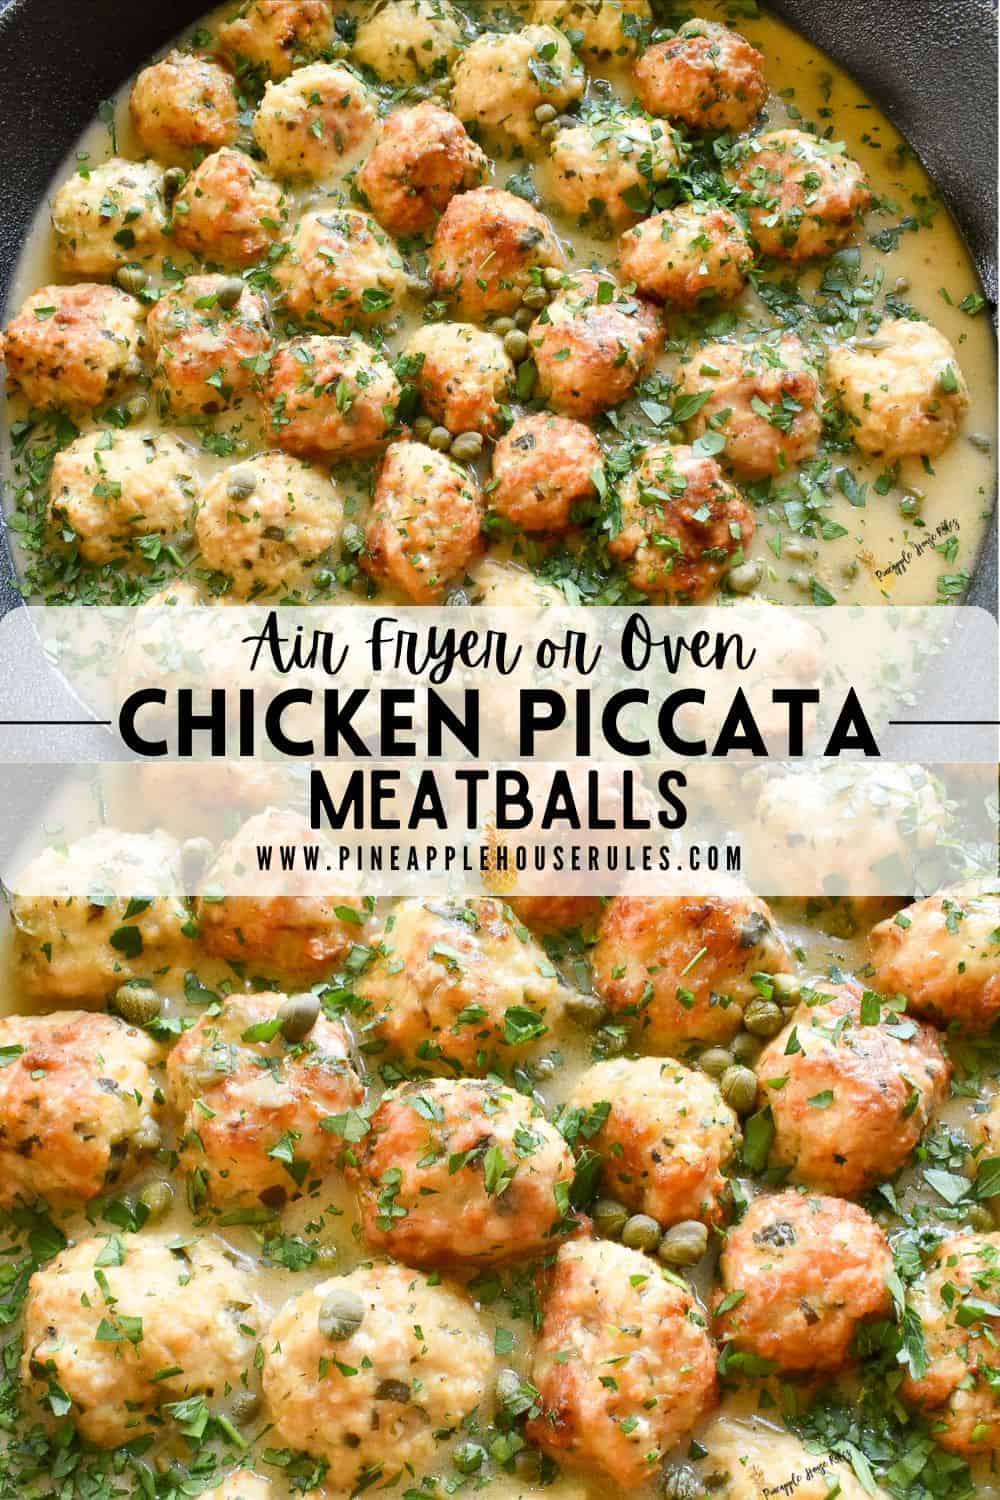 Chicken Piccata Meatballs are an easy and delicious dinner that comes together in just minutes! They're full of lemony, caper-y flavor and pair perfectly with pasta, veggies, or salad. You can cook these in the air fryer or the oven, too. Chicken Piccata Meatballs | Chicken Piccata Meatballs Taste of Home | Chicken Piccata Meatballs Recipe | Chicken Piccata Meatballs Low Carb | Chicken Piccata Meatballs Healthy | Chicken Piccata Meatballs Keto | Air Fryer Recipes | Ground Chicken Recipes